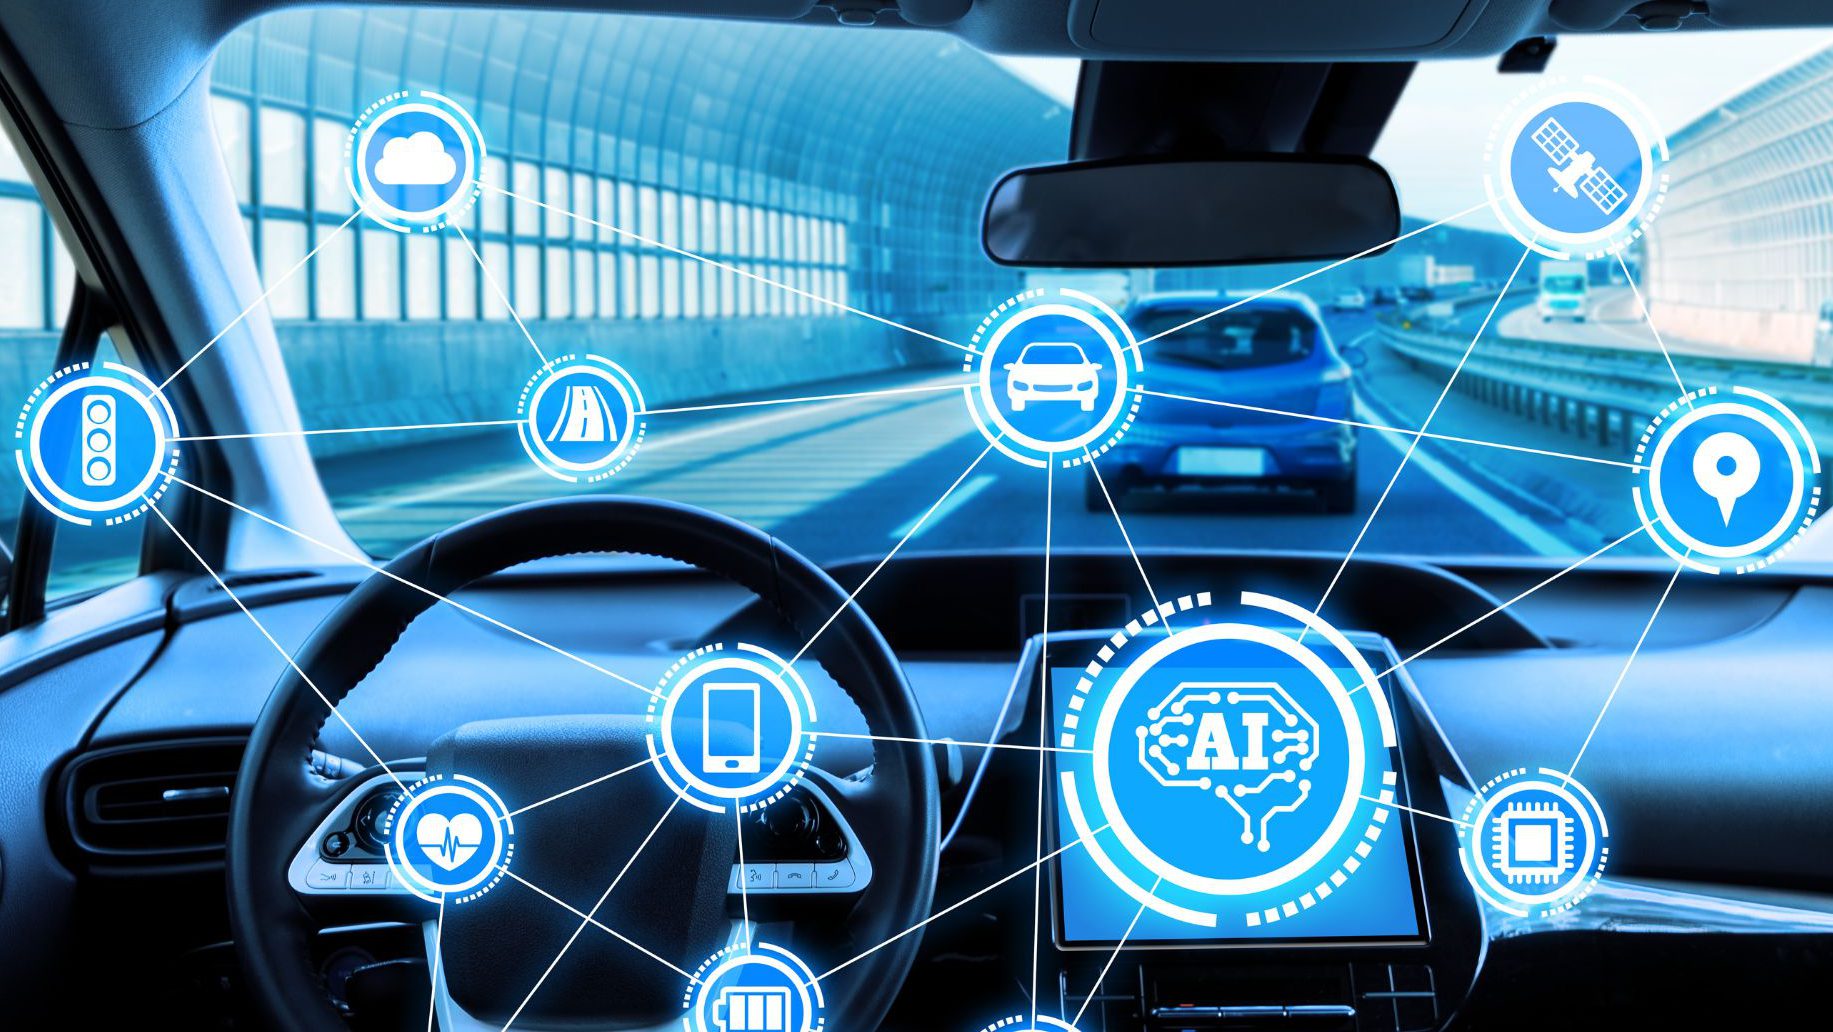 Global Vehicle Analytics Market Overview And Prospects Includes